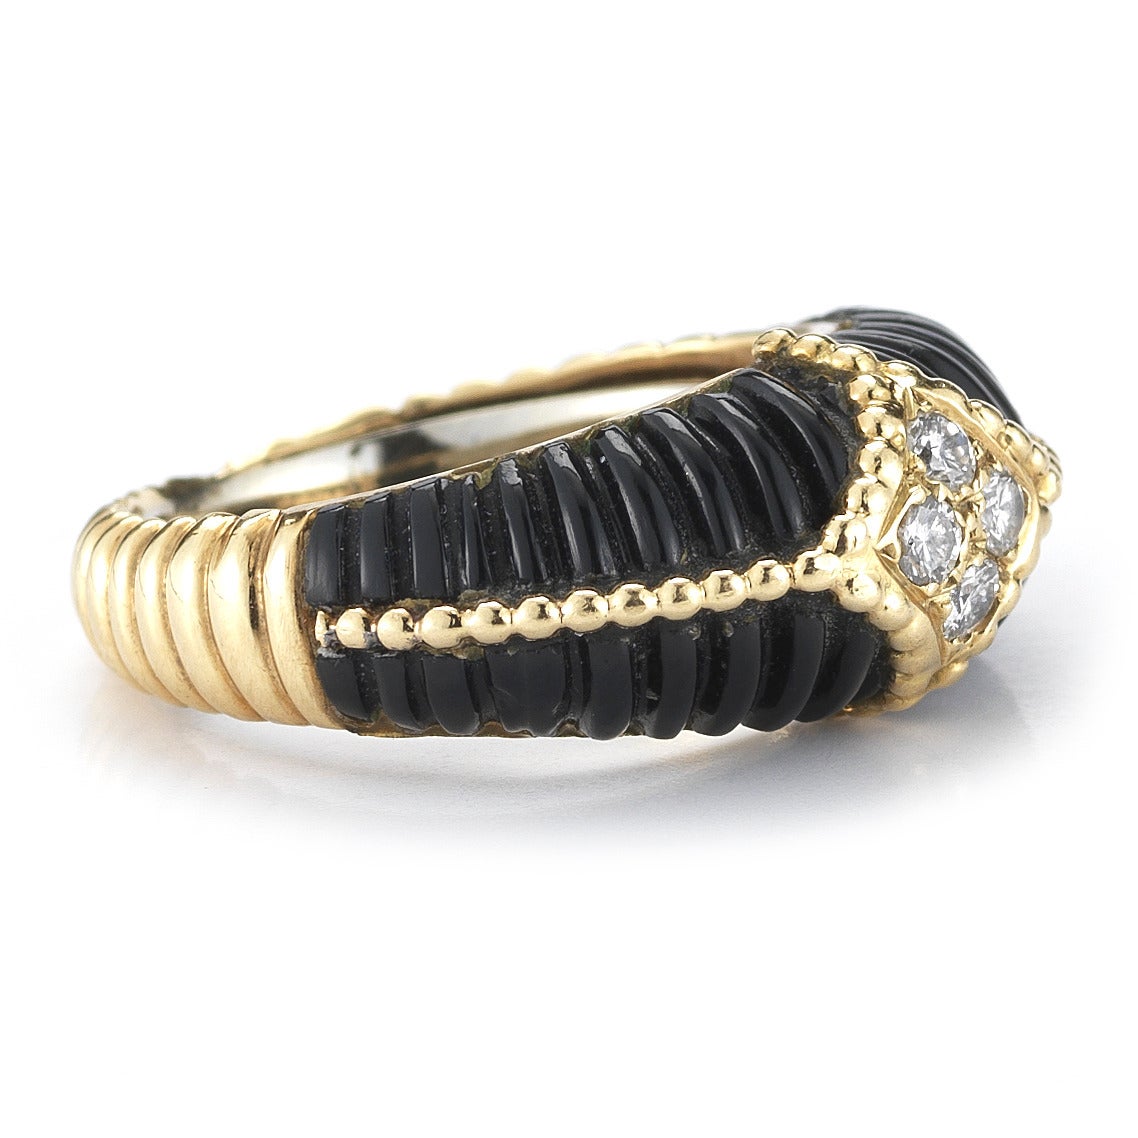 Van Cleef & Arpels Onyx, Diamond and 18k Gold Ring In Excellent Condition For Sale In New York, NY